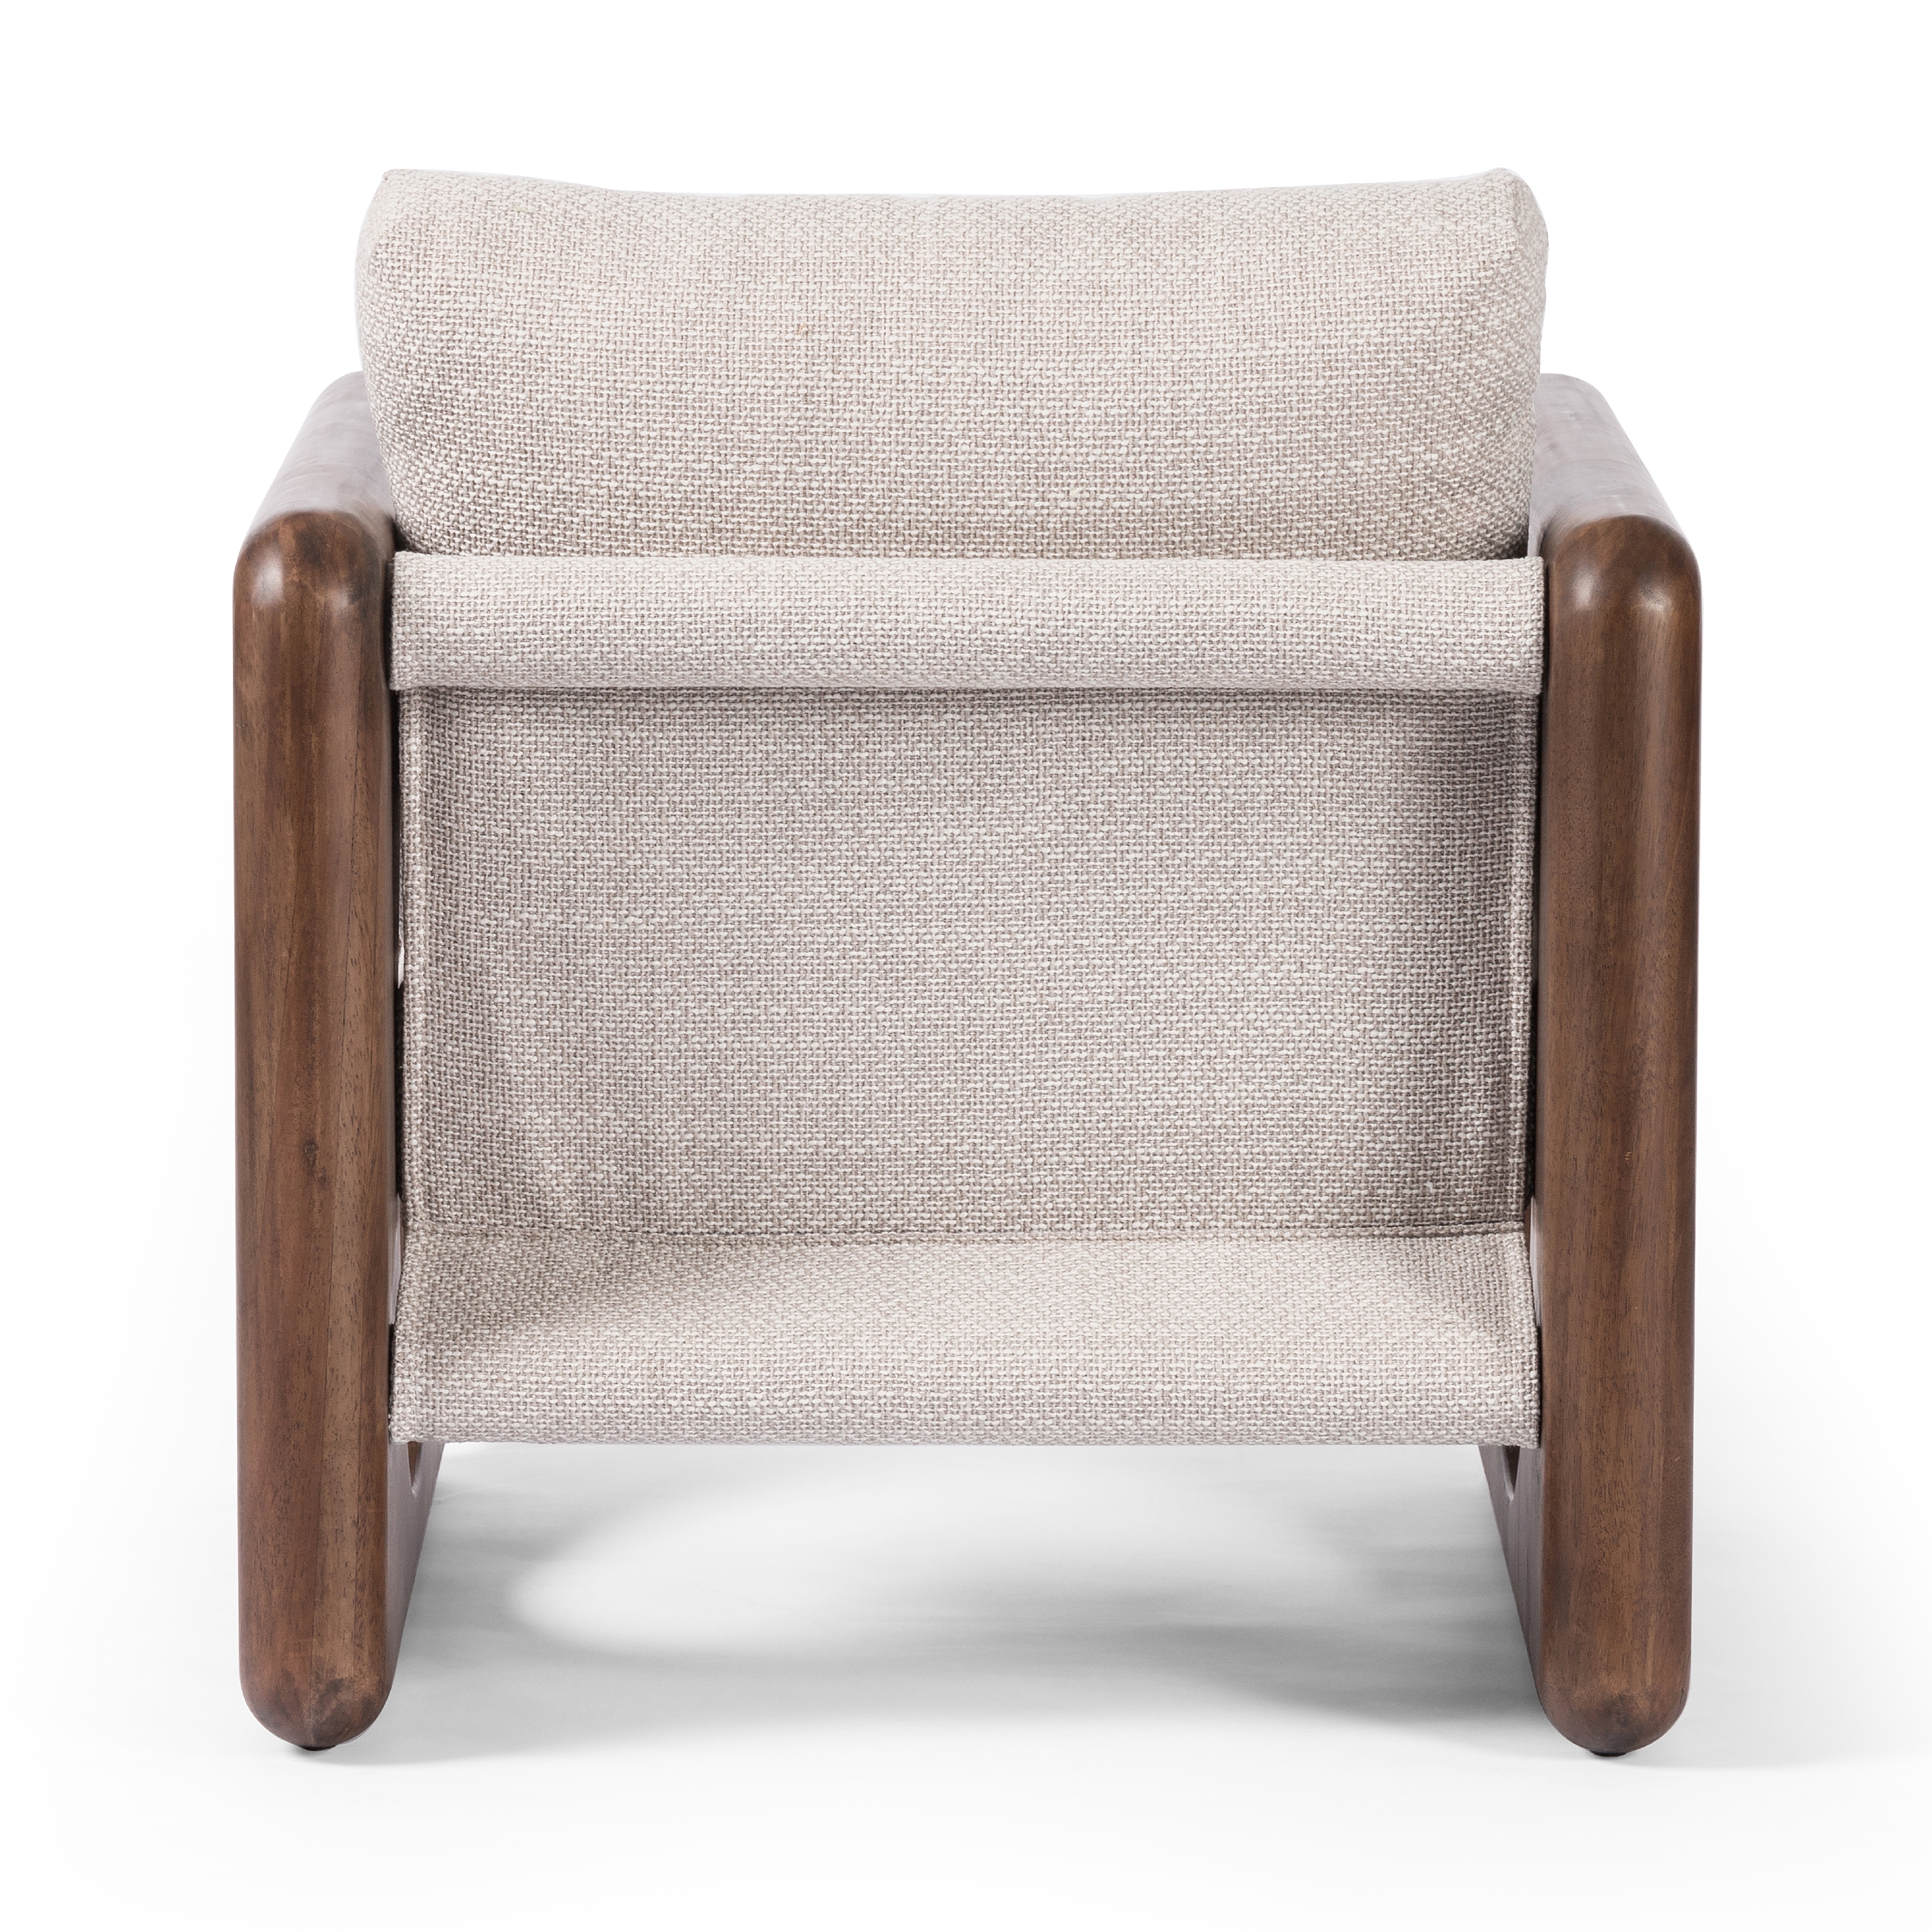 Downey Chair-Gibson Wheat - Image 5